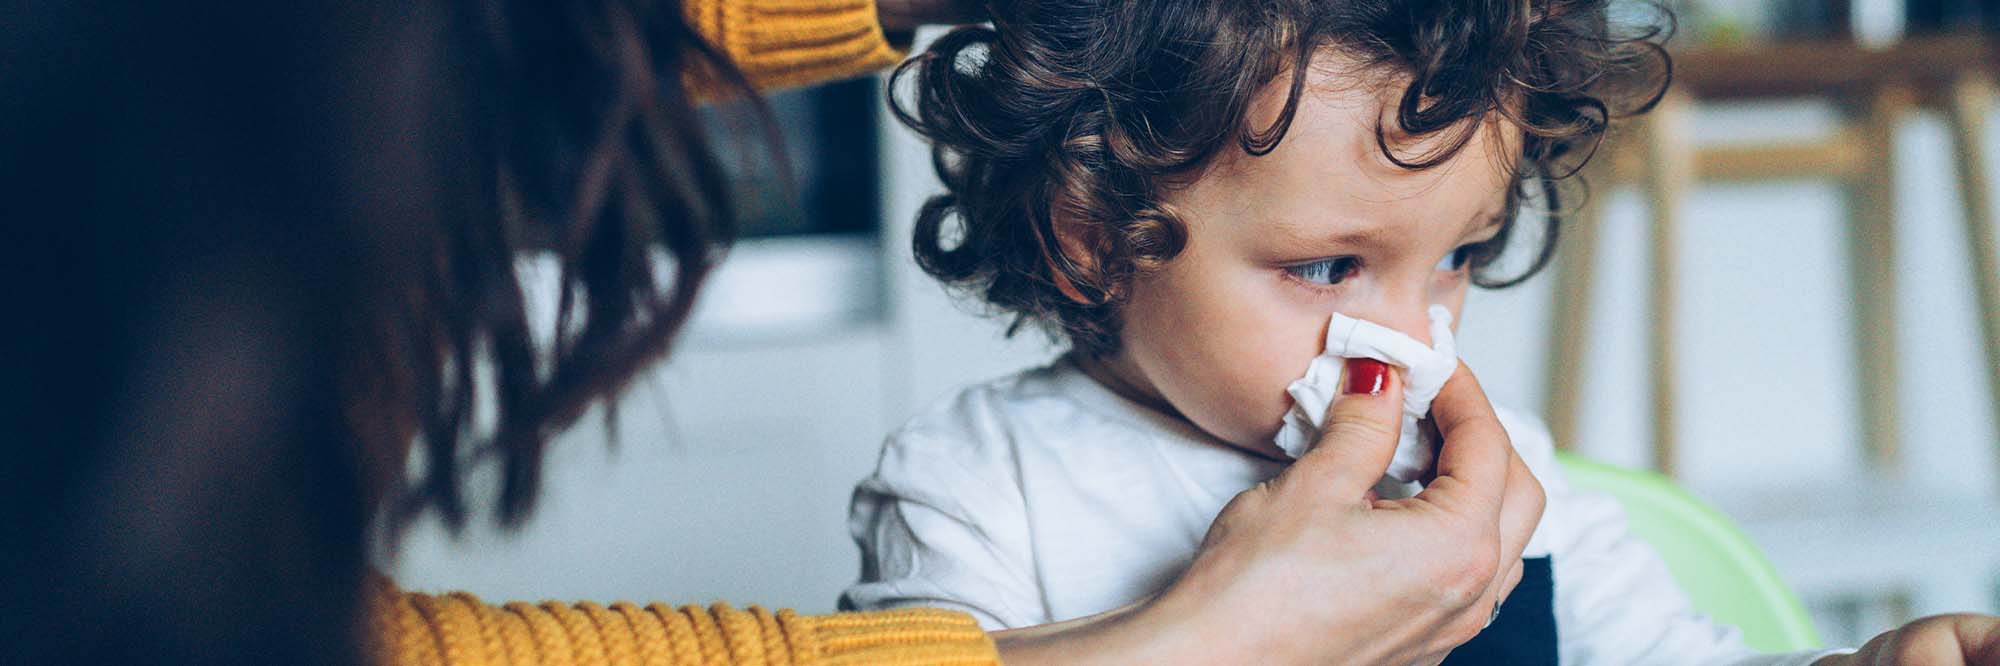 How to Clear a Baby's Nose? - ChildrensMD